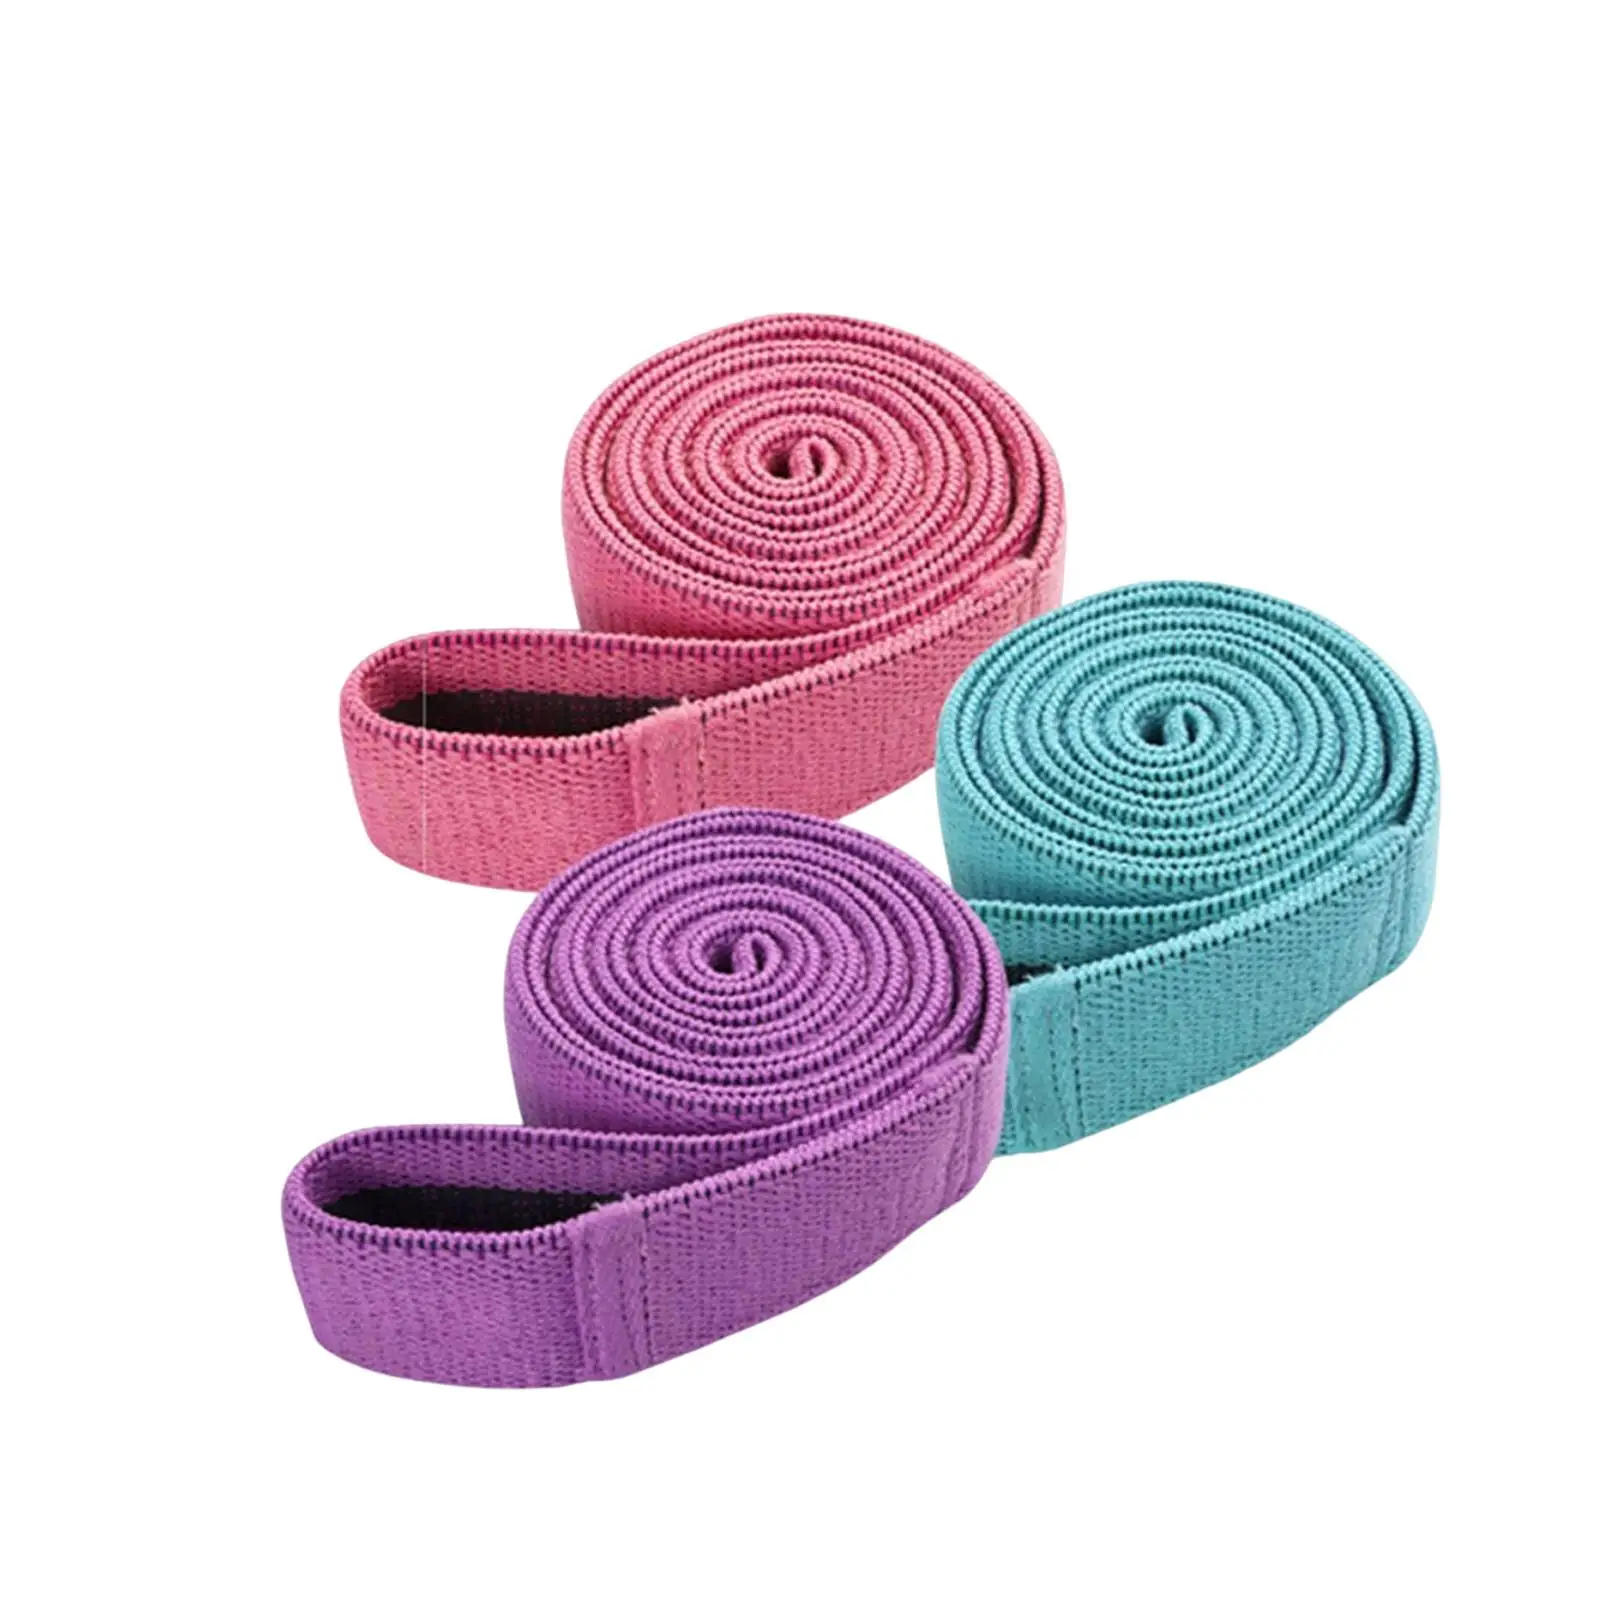 3Pcs Resistance Bands Set Pull up Assistance Bands Workout Loop Band Heavy Duty 3 Different Levels for Body Stretching Fitness